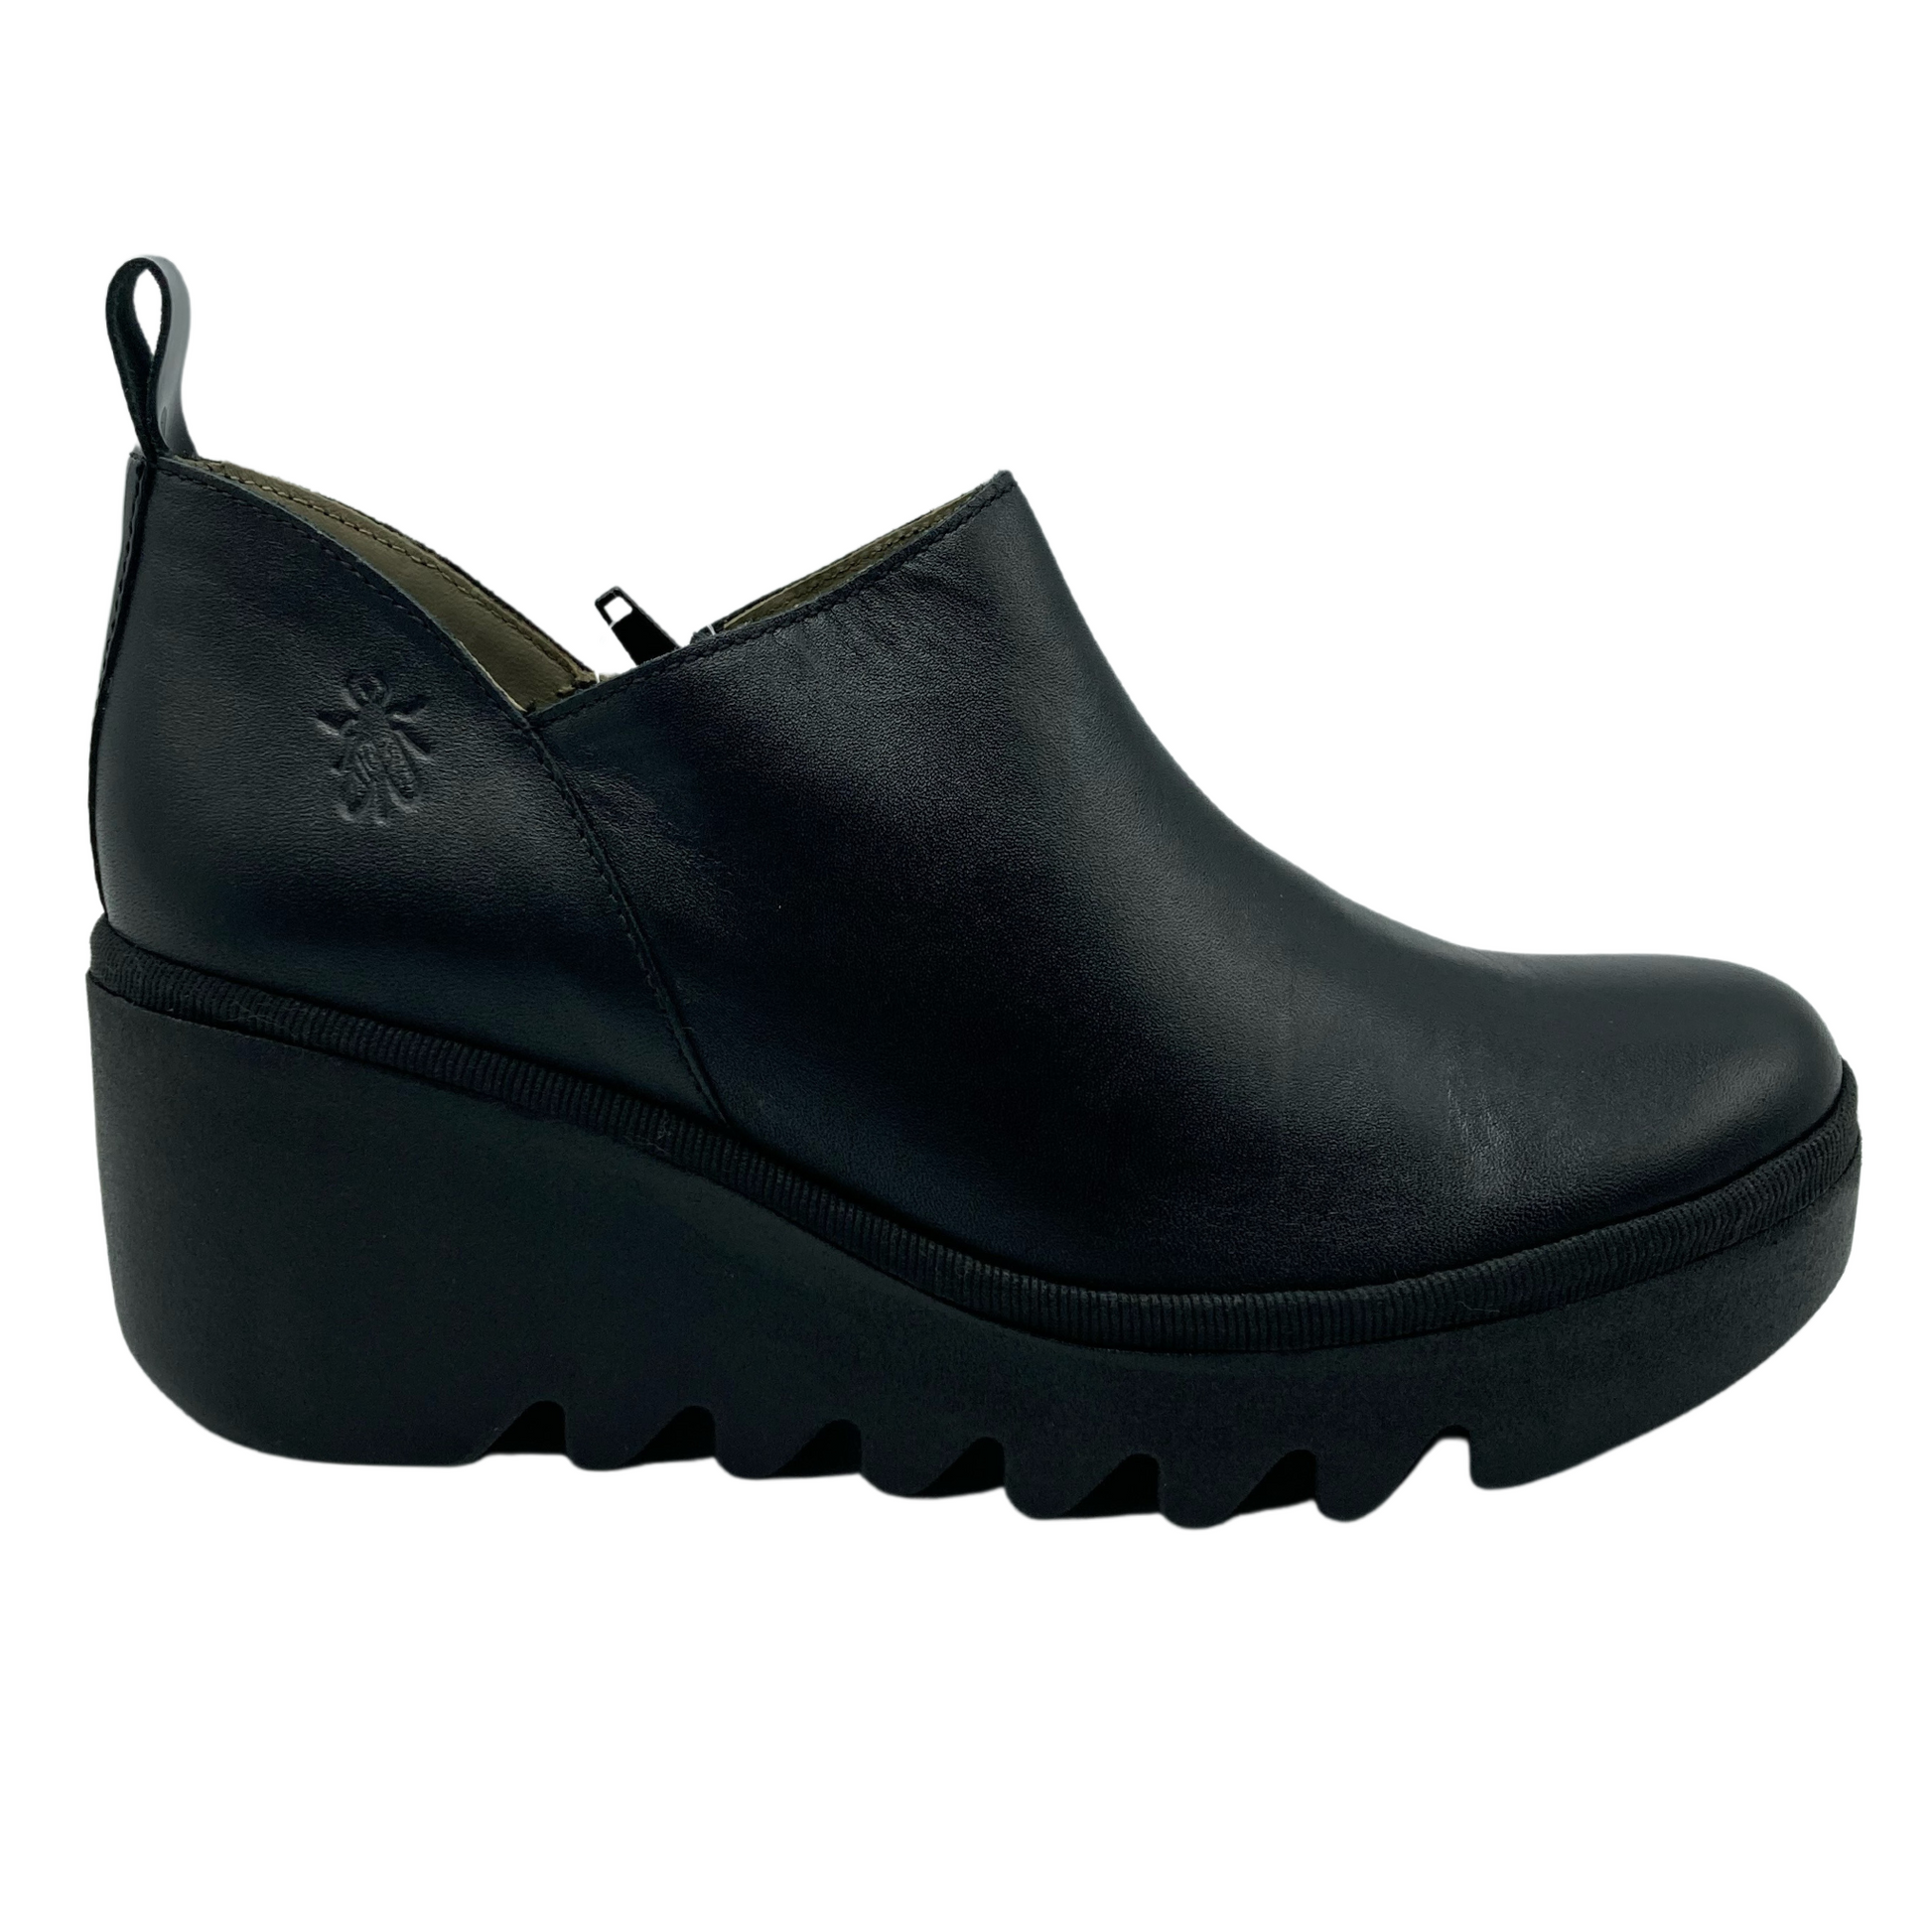 Right facing view of black leather bootie with heel pull tab. Black rubber wedge heel